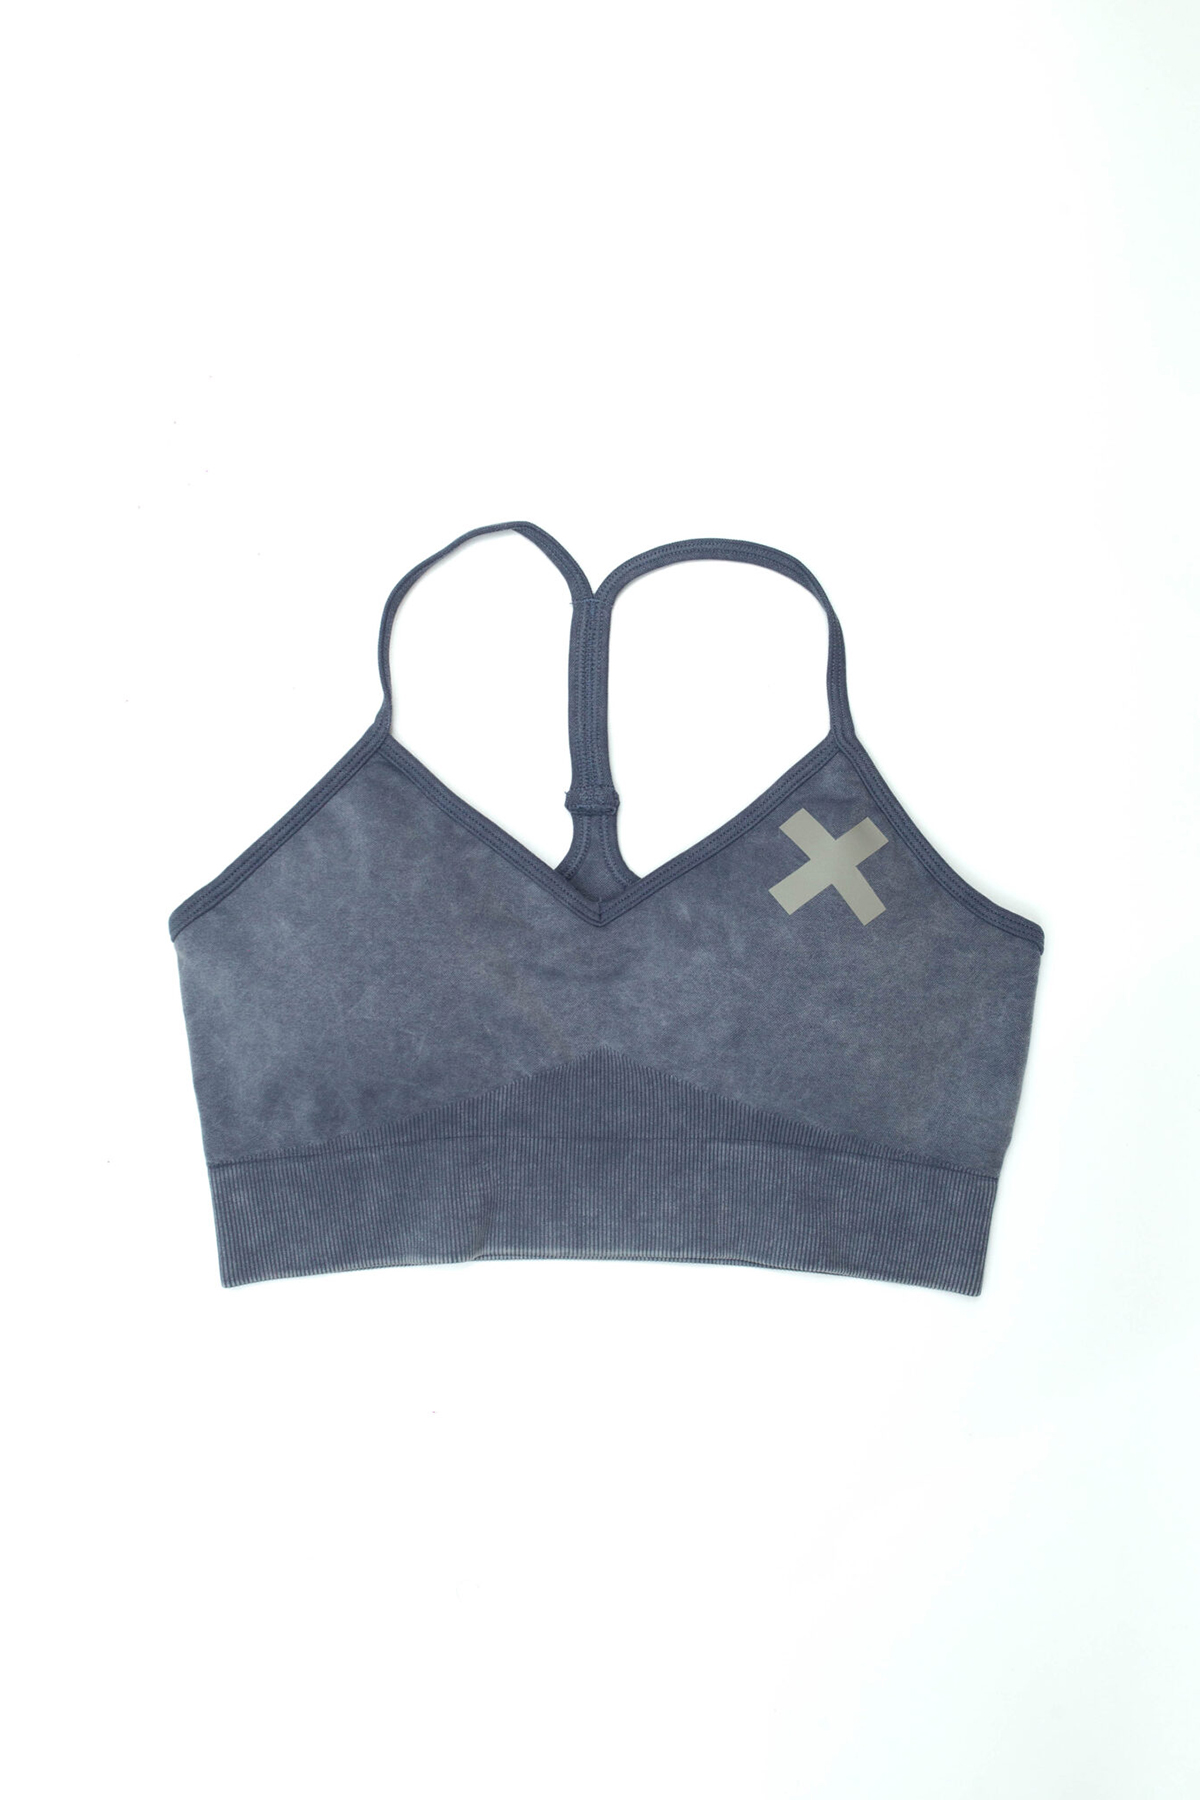 Time-Out-X-Racerback-High-Impact-Running-Sports-Bra—Washed-Indigo—Front